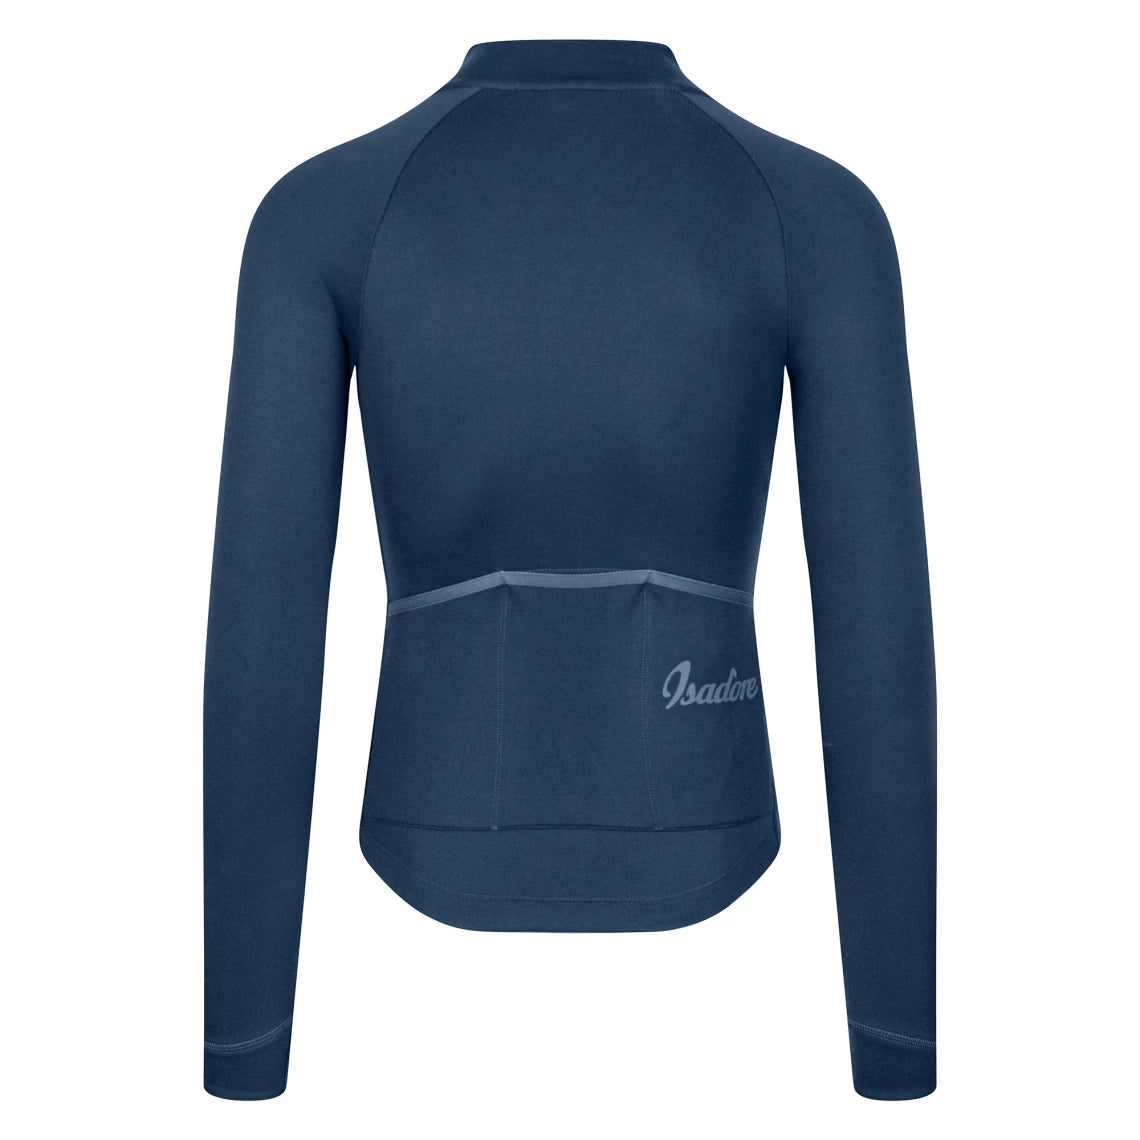 Isadore Men's Signature Thermal LS Jersey